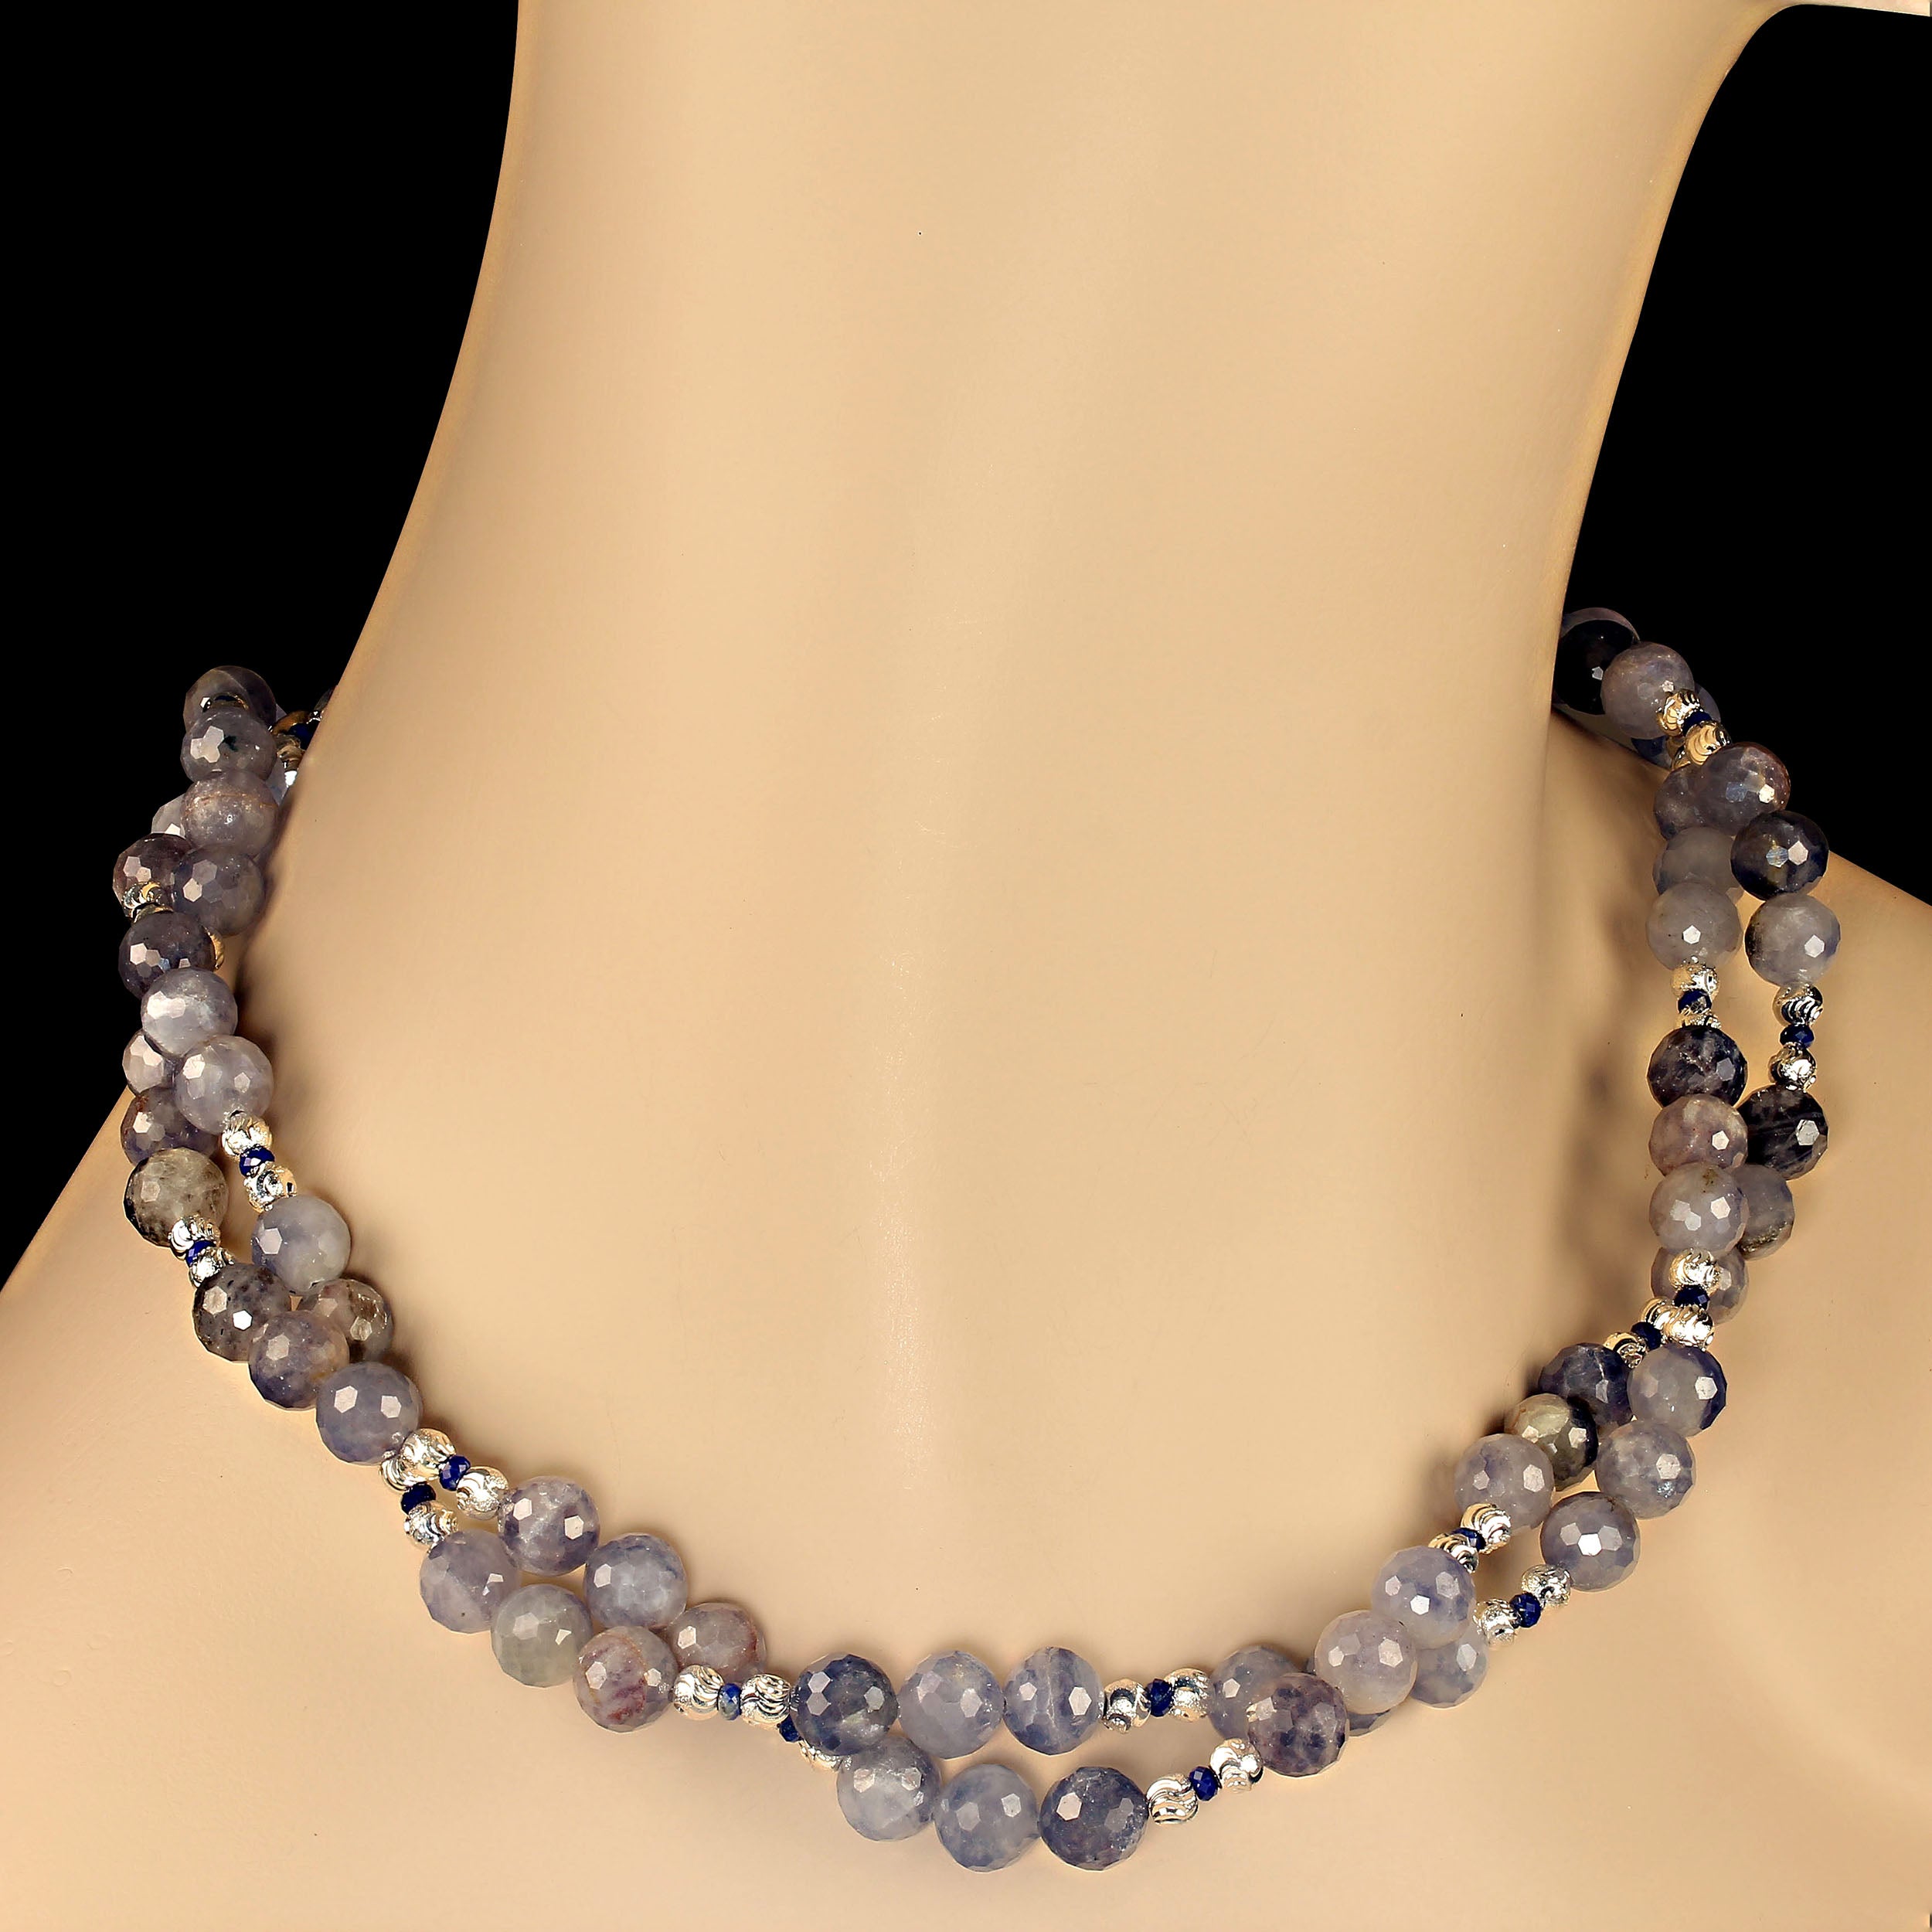 AJD 2 Strand Translucent Iolite 21 Inch necklace with Silver Accents  Great Gift For Sale